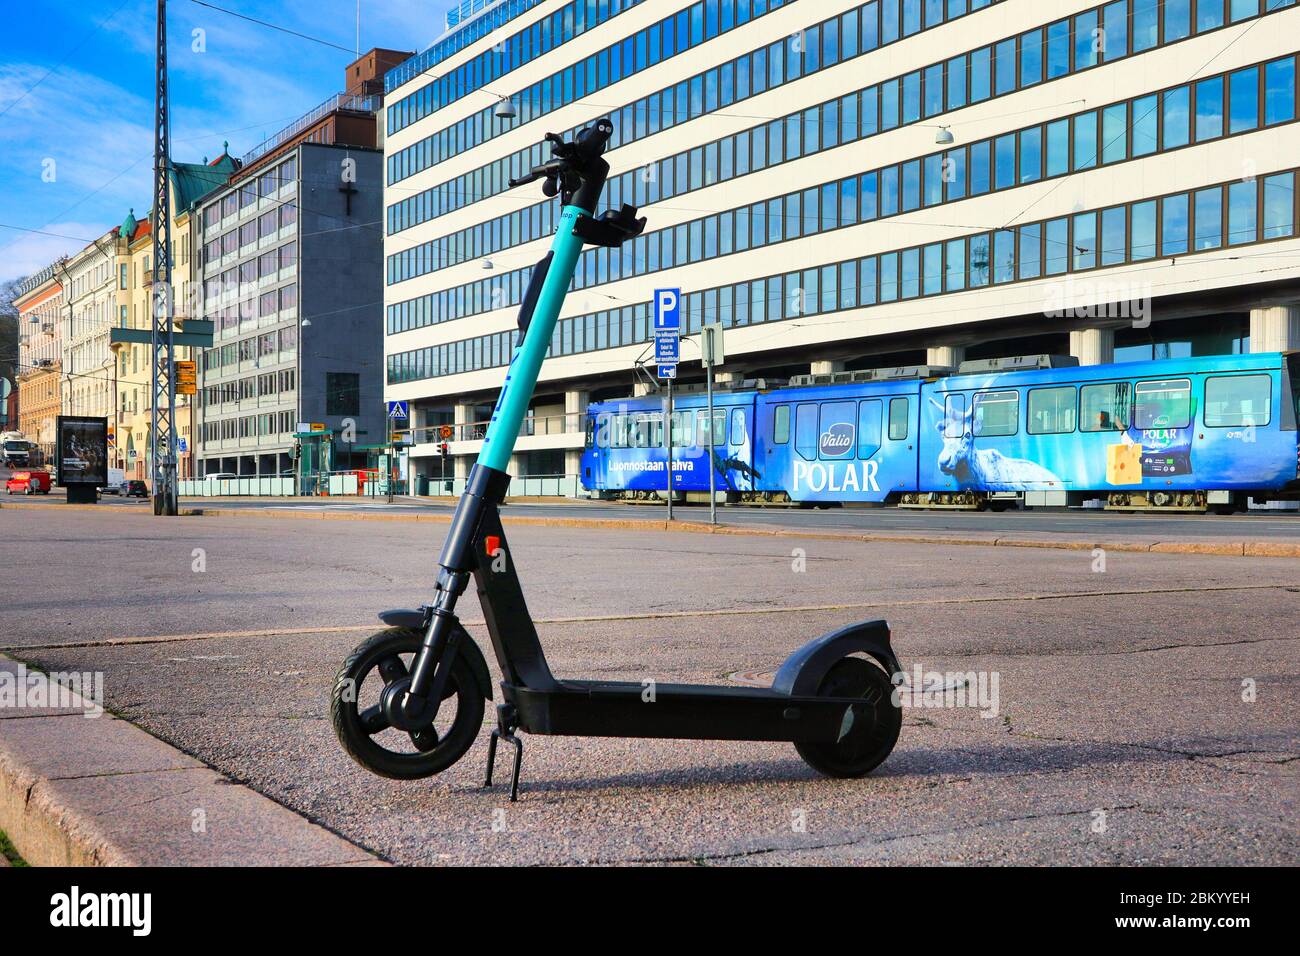 Tier electric scooter or e-scooter parked in city pedestrian area, tram on the background. Helsinki, Finland. May 5, 2020. Stock Photo